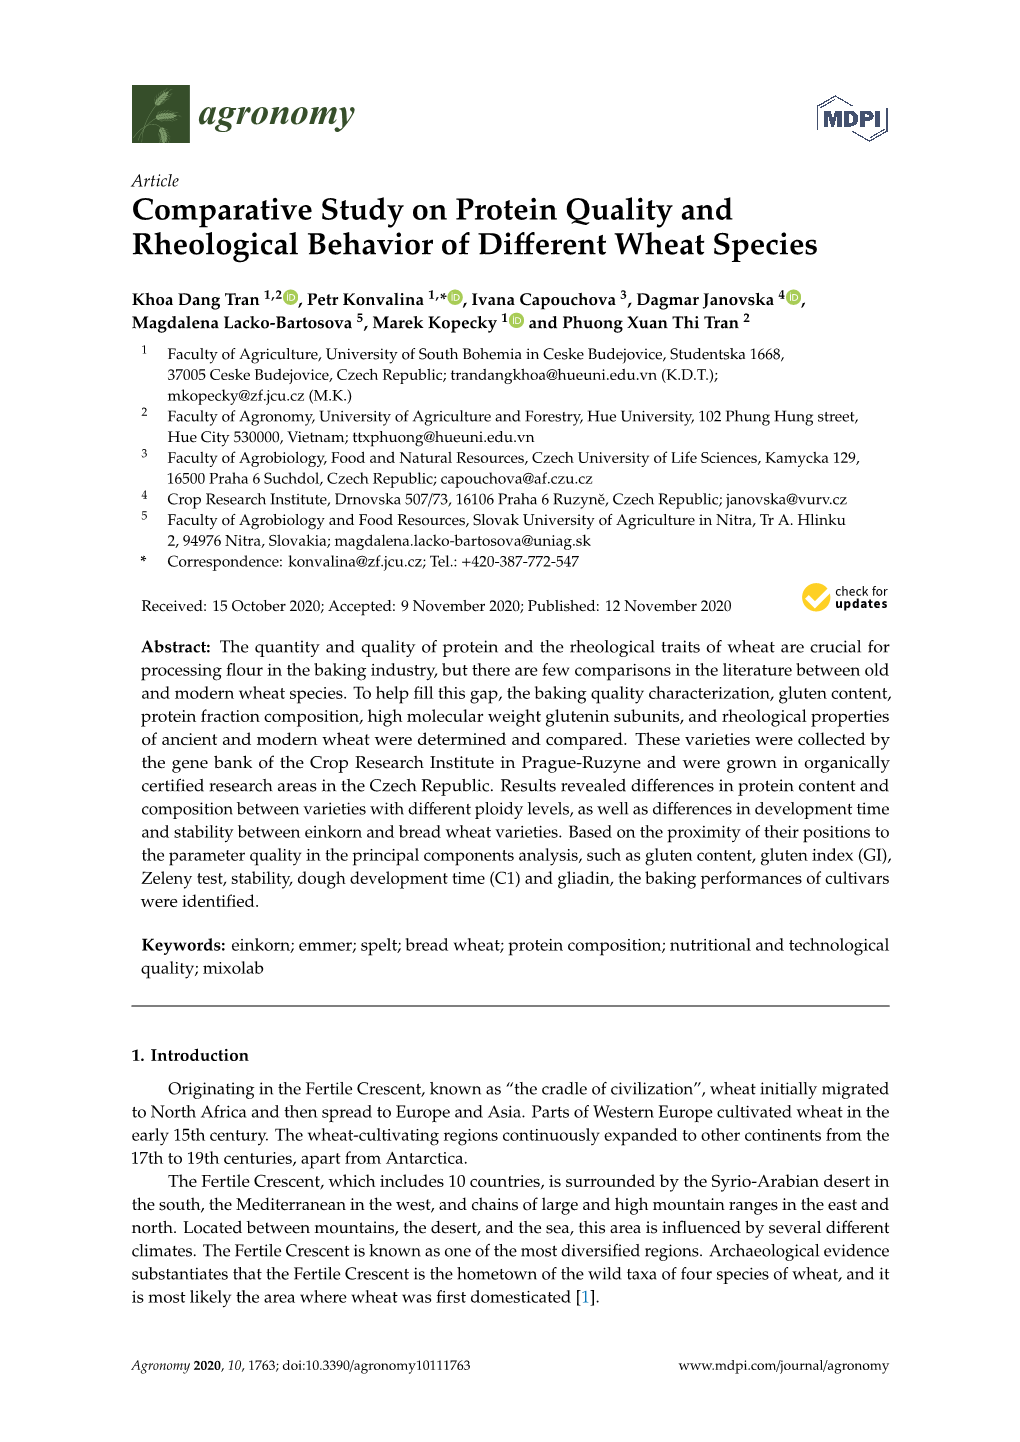 Comparative Study on Protein Quality and Rheological Behavior of Diﬀerent Wheat Species